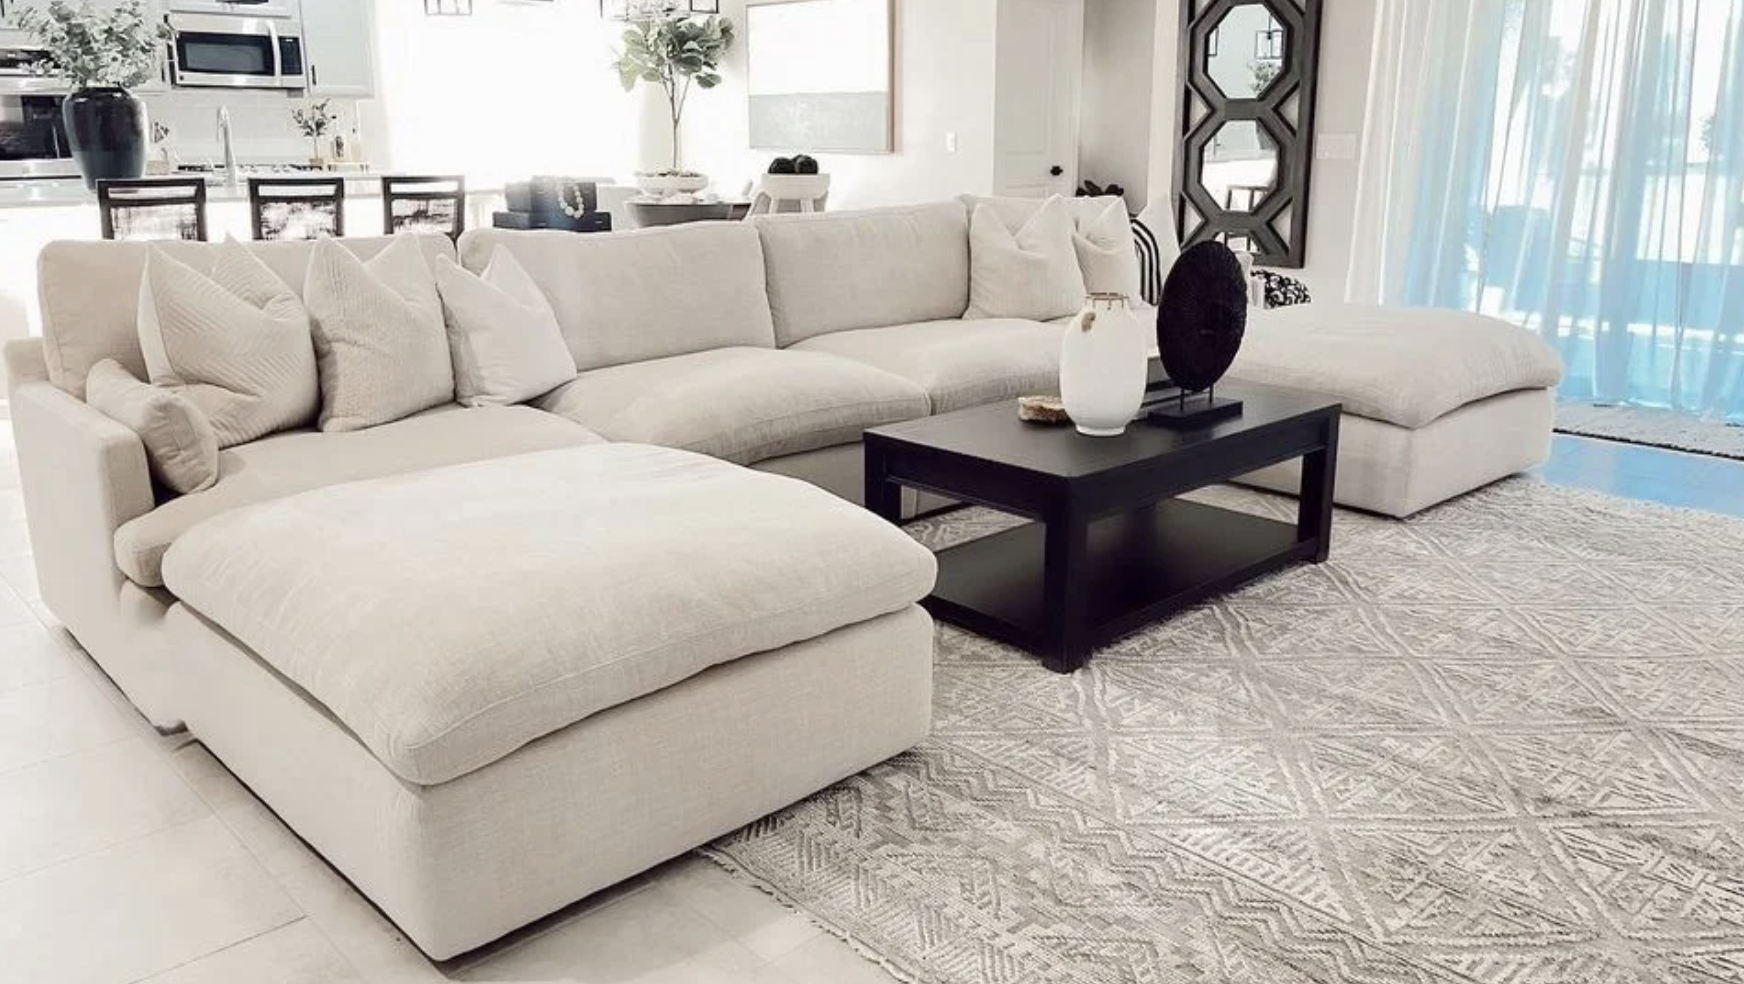 7 of The BEST Cloud Couch Alternatives That are Thousands LESS Than Restoration Hardware